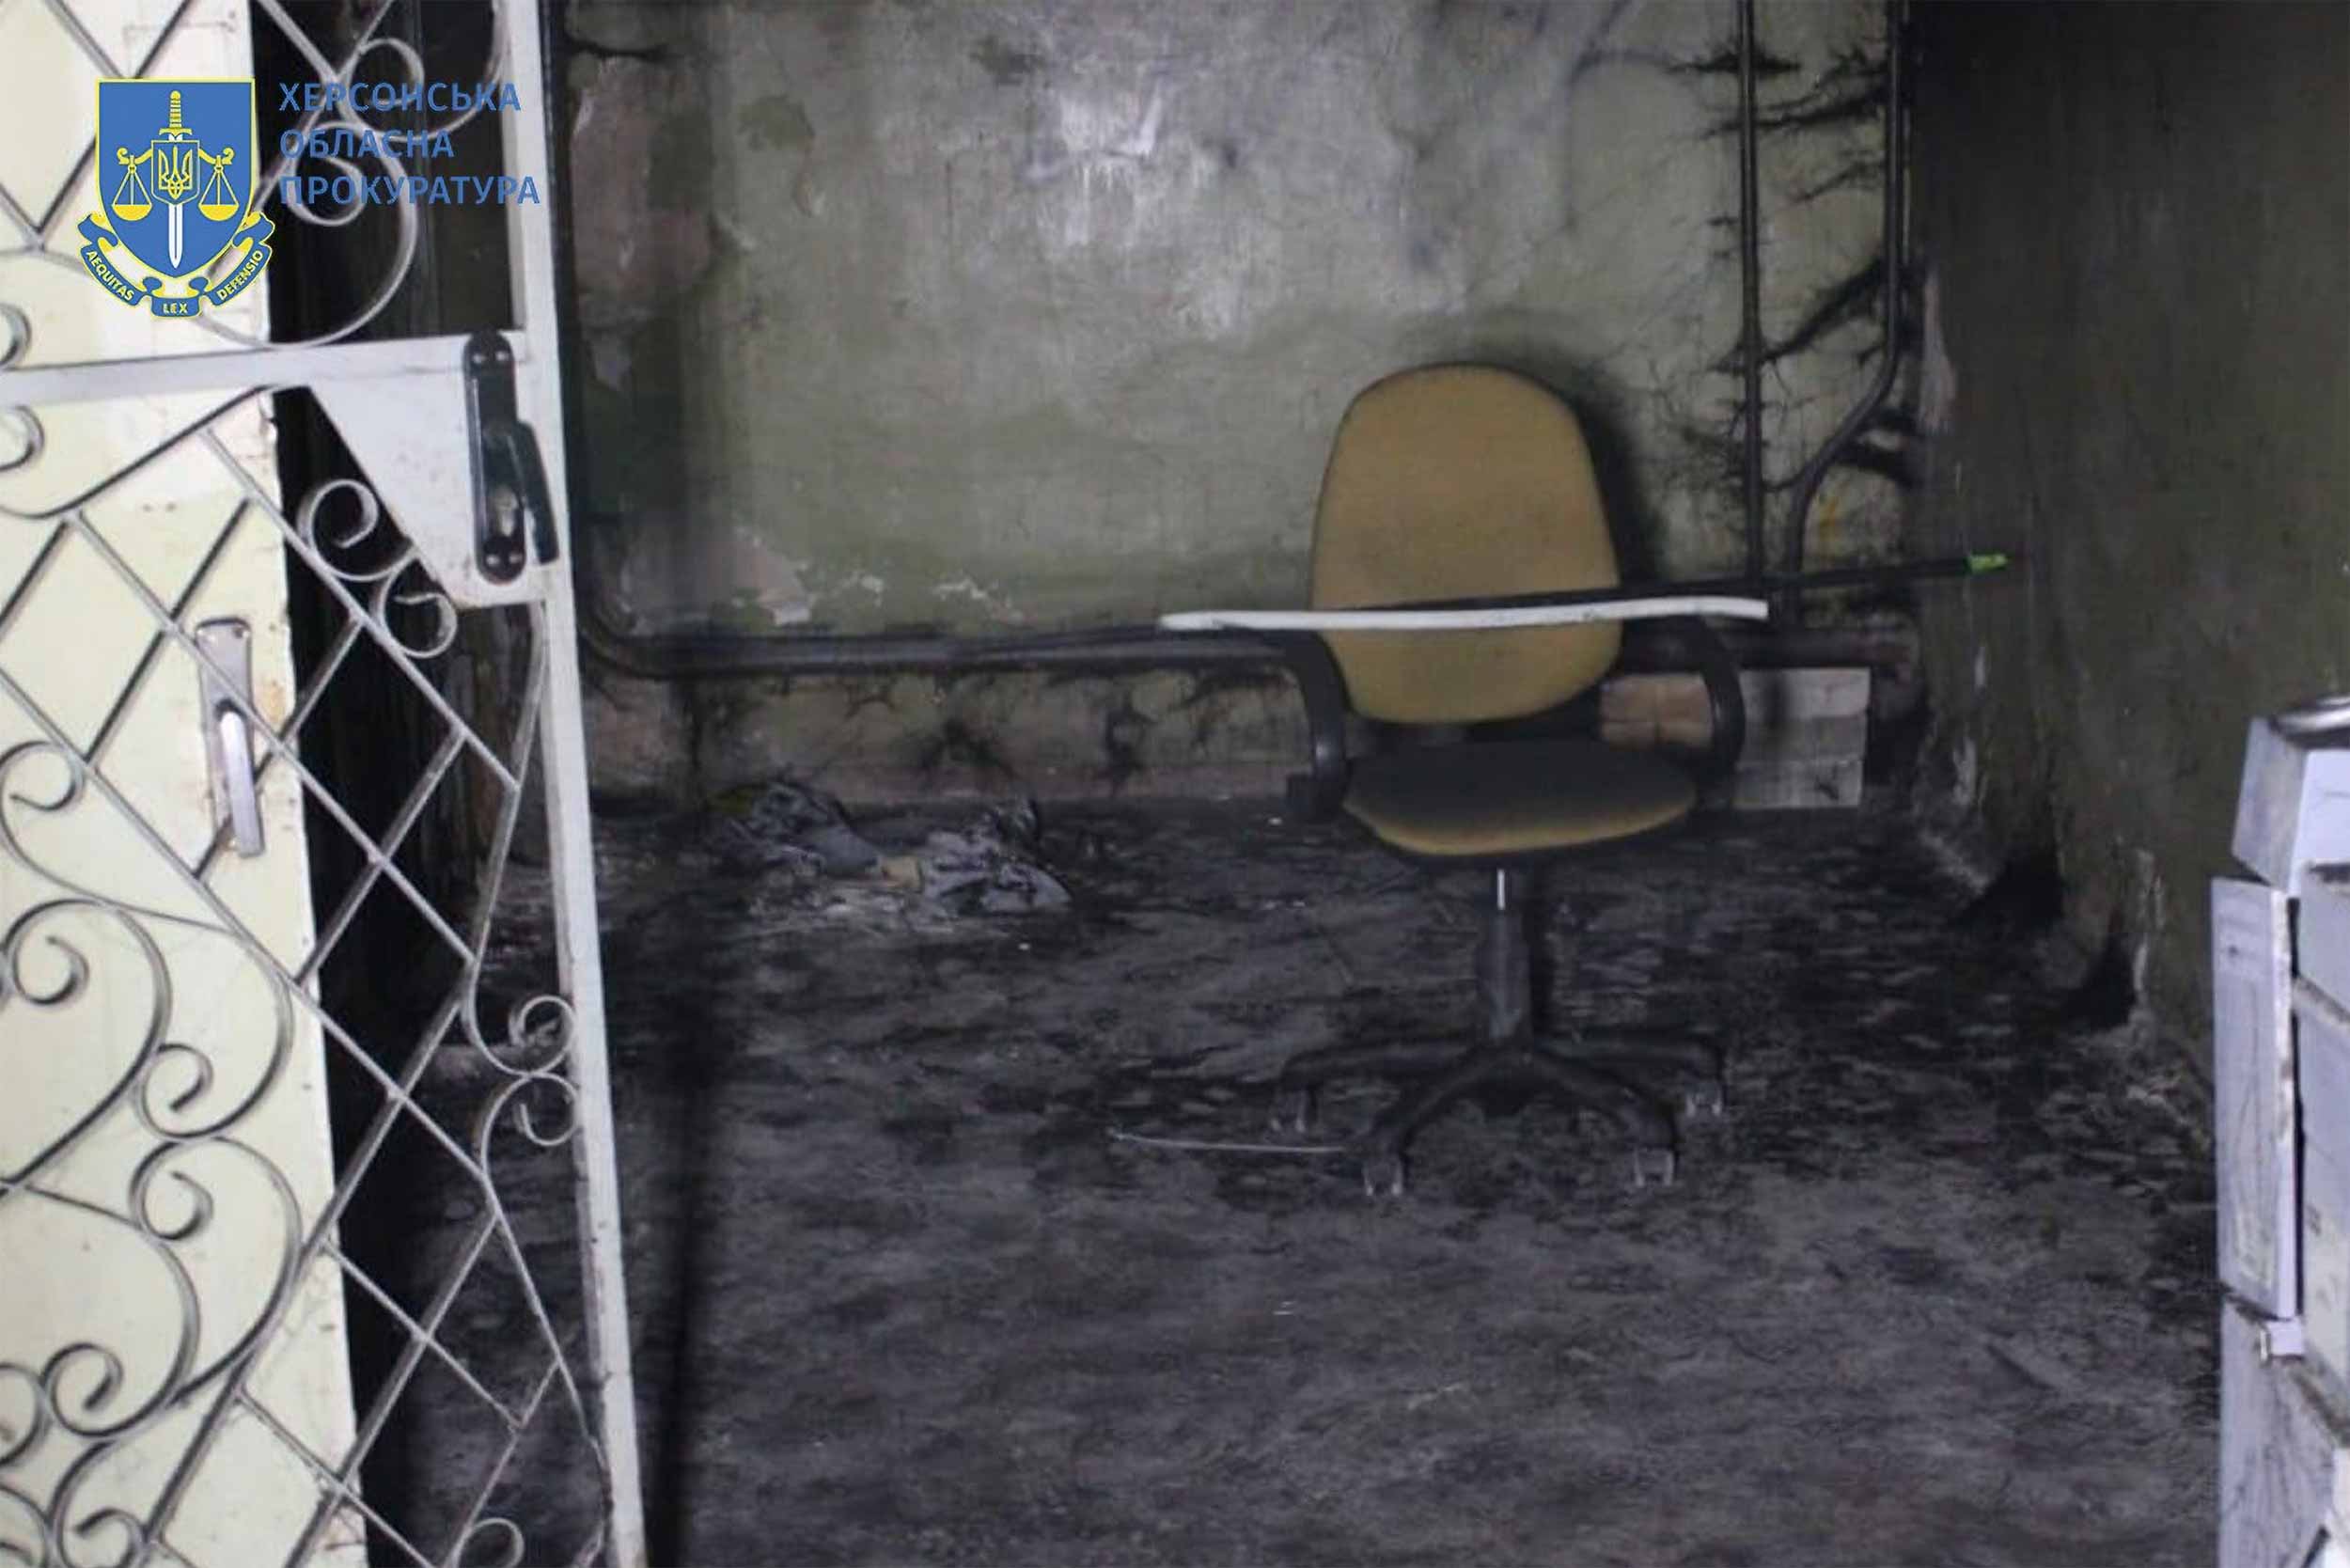 Russian forces occupied the southern port city of Kherson in late February 2022 and set up torture chambers where civilians were interrogated, beaten and tortured. © Kherson Regional Prosecutor's Office